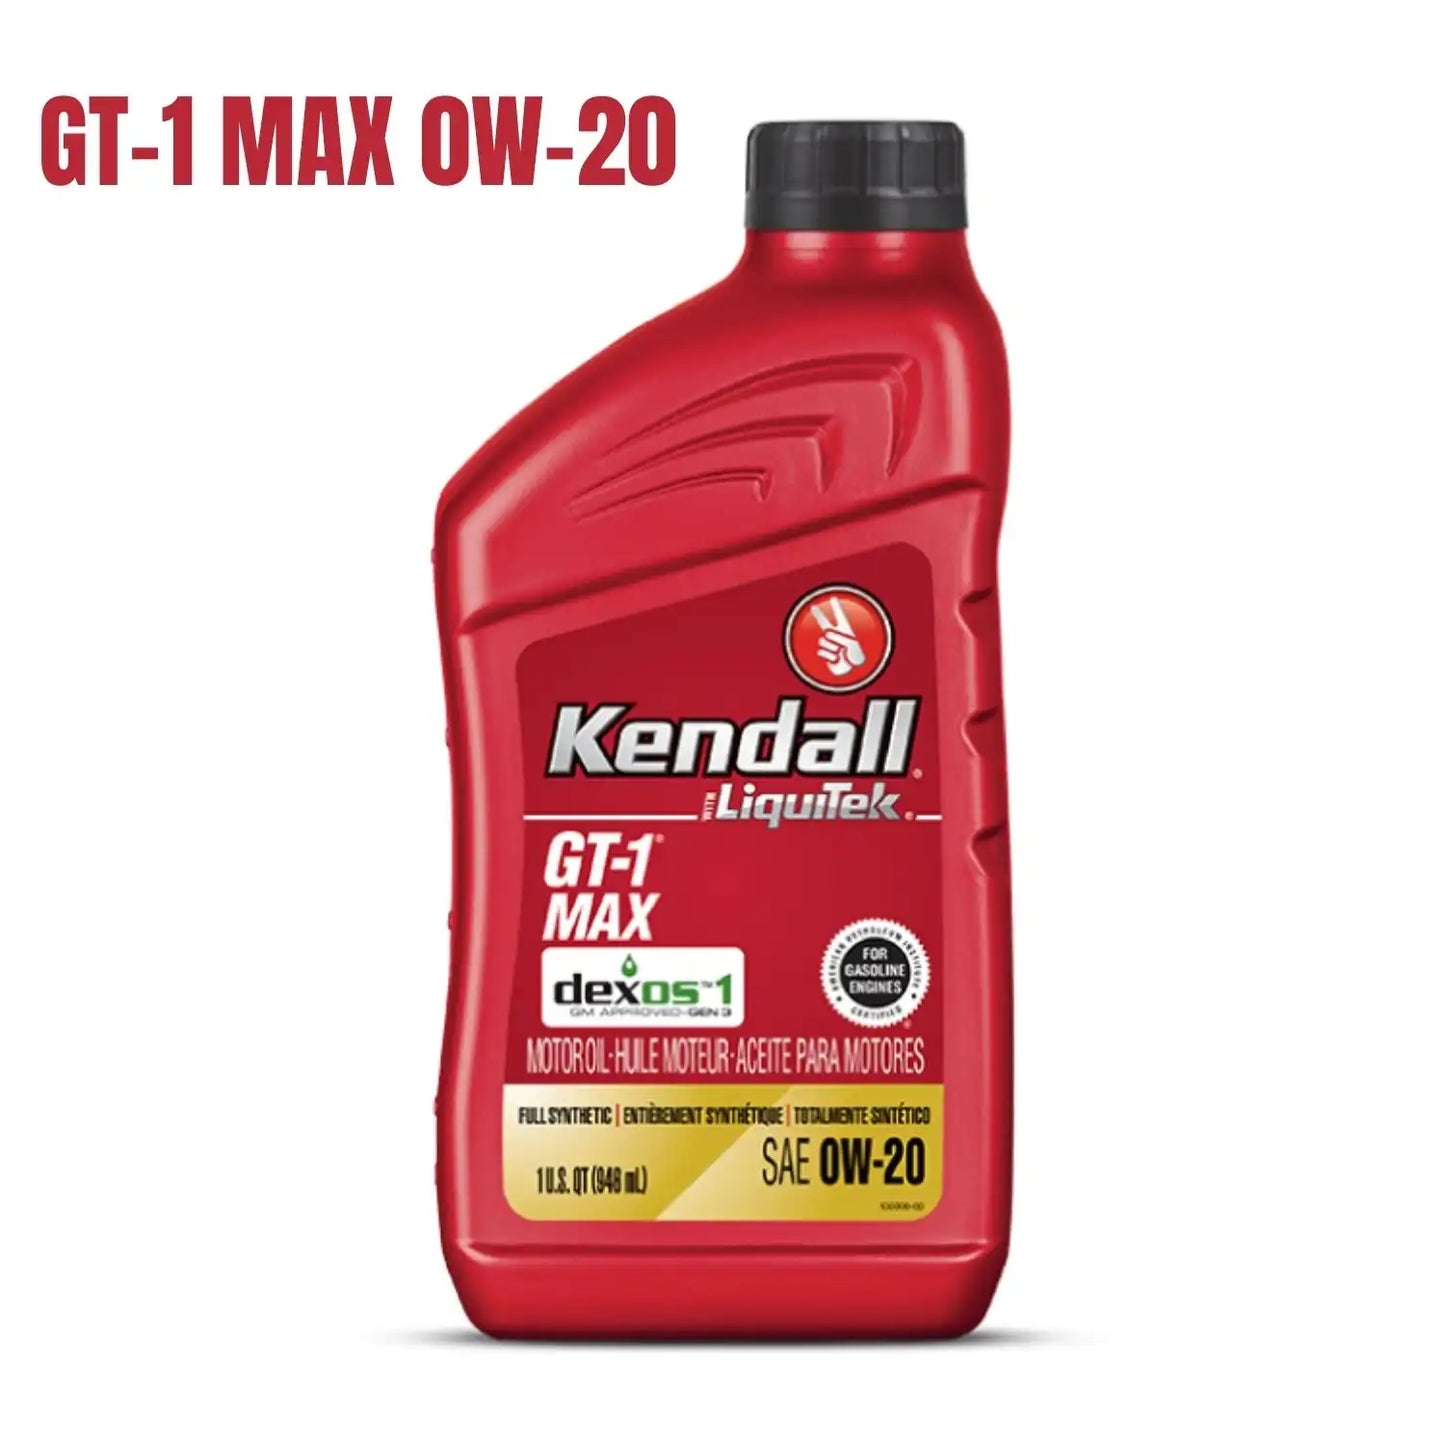 Kendall Gt-1 0w20 Max Full-Synthetic Car Engine Oil 946ml